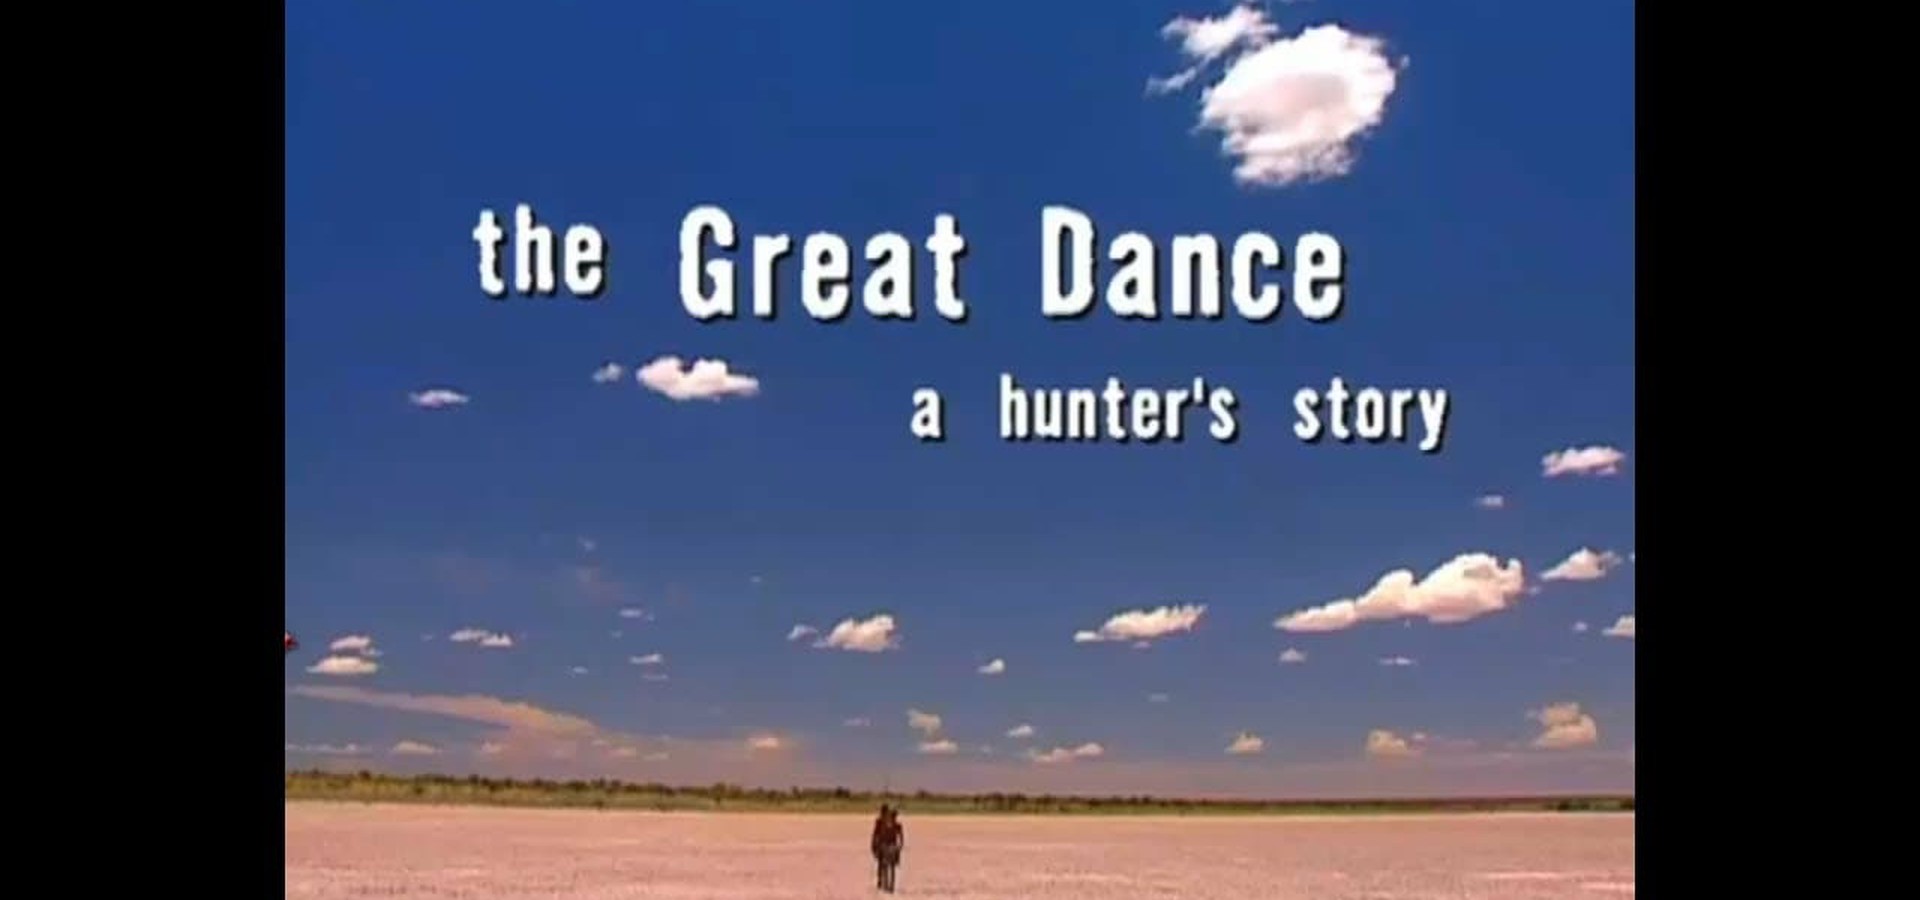 The Great Dance: A Hunter's Story